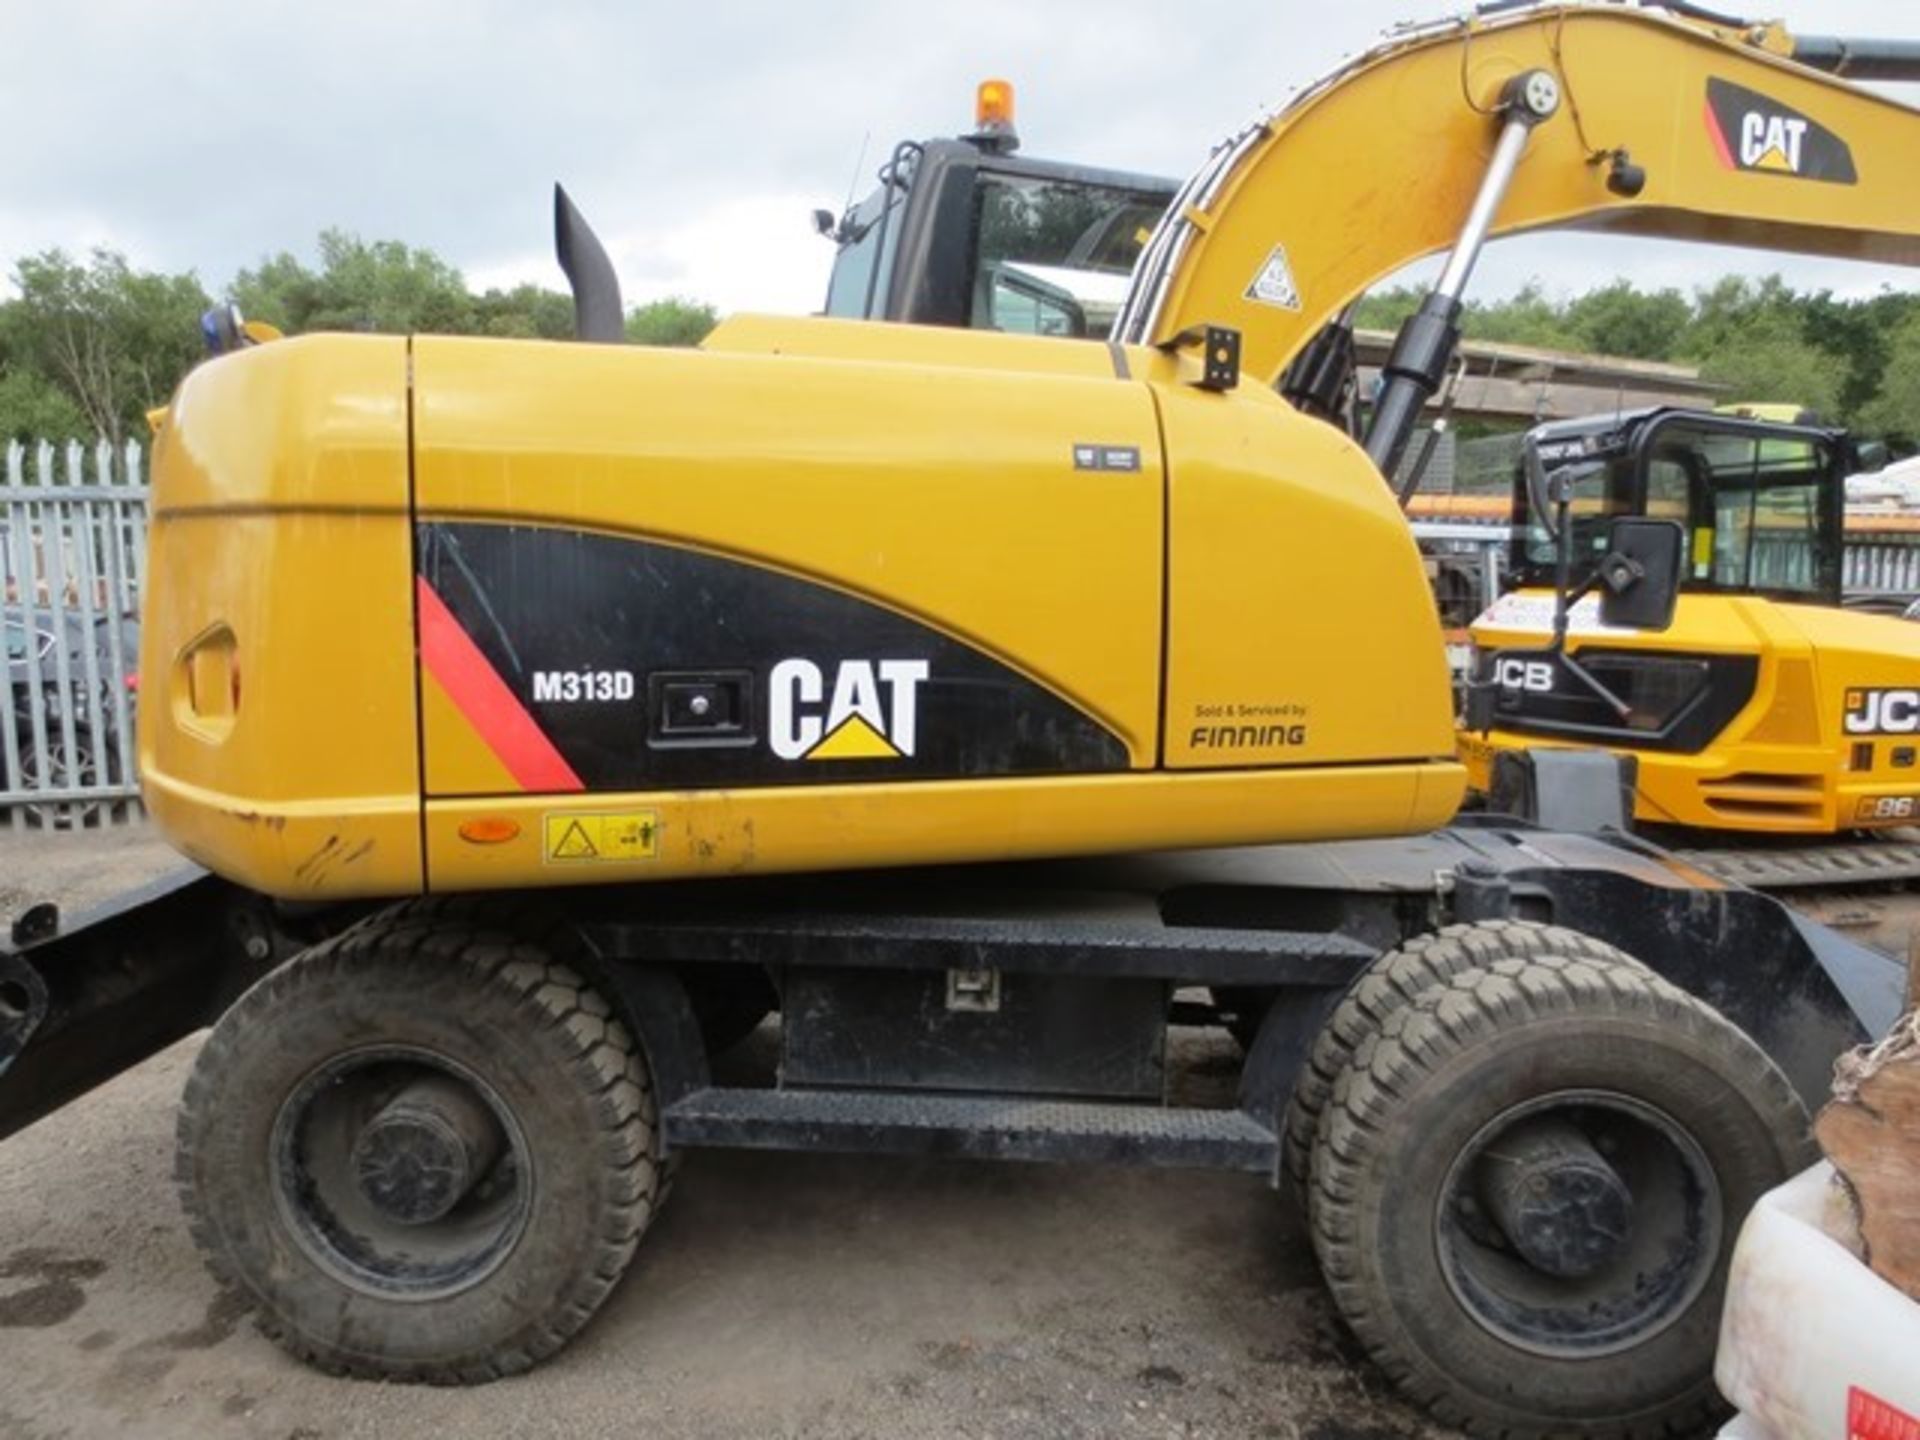 Caterpillar M313D wheeled hydraulic excavator with rear dozer and hydraulic supports, product ID No: - Image 10 of 21